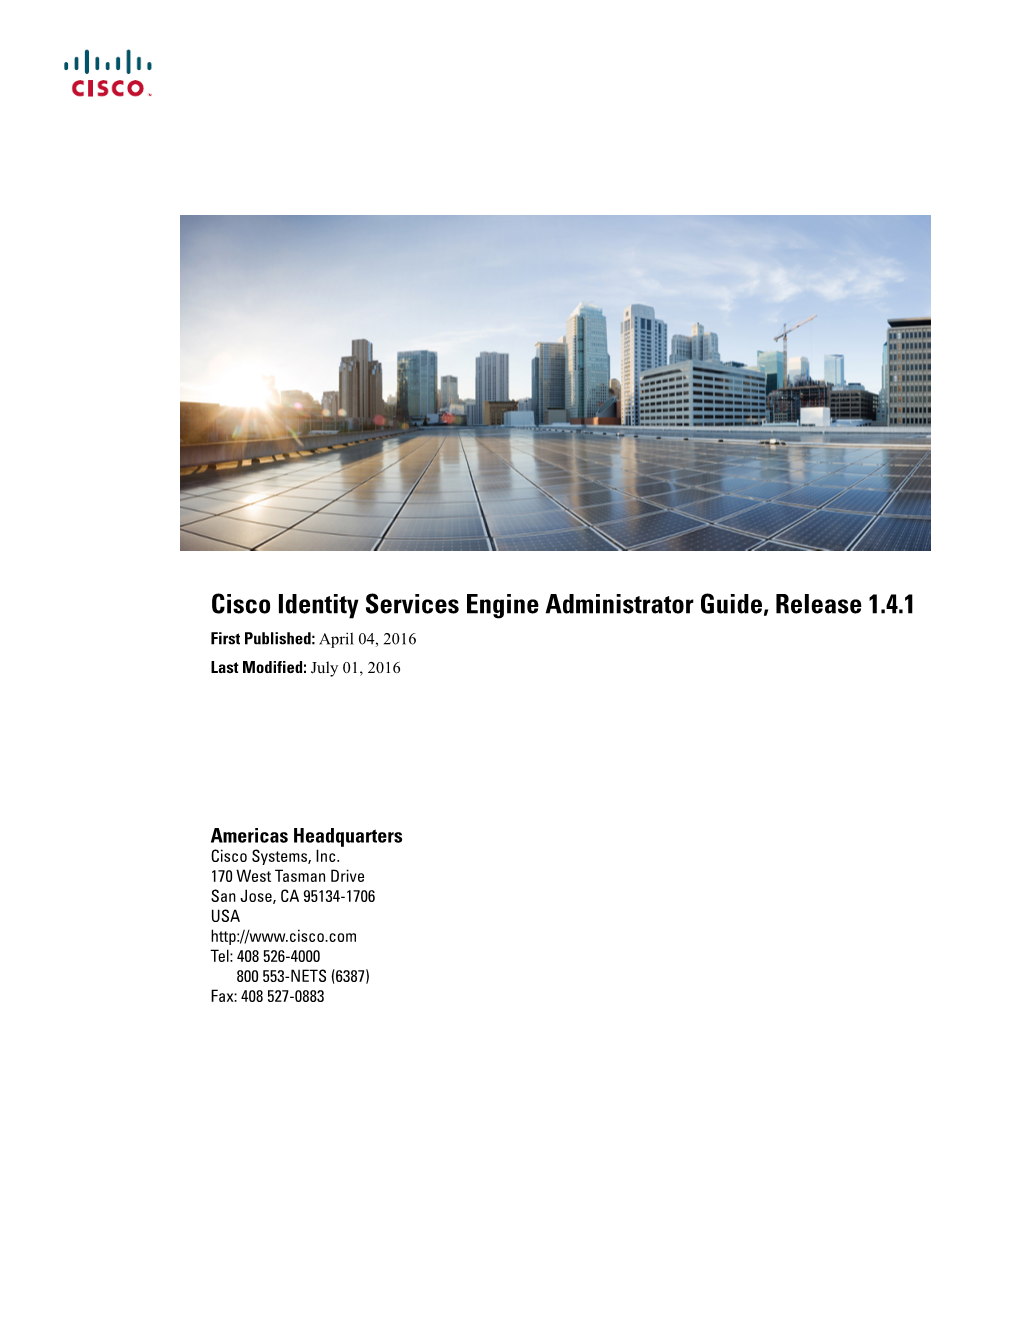 Cisco Identity Services Engine Administrator Guide, Release 1.4.1 First Published: April 04, 2016 Last Modified: July 01, 2016